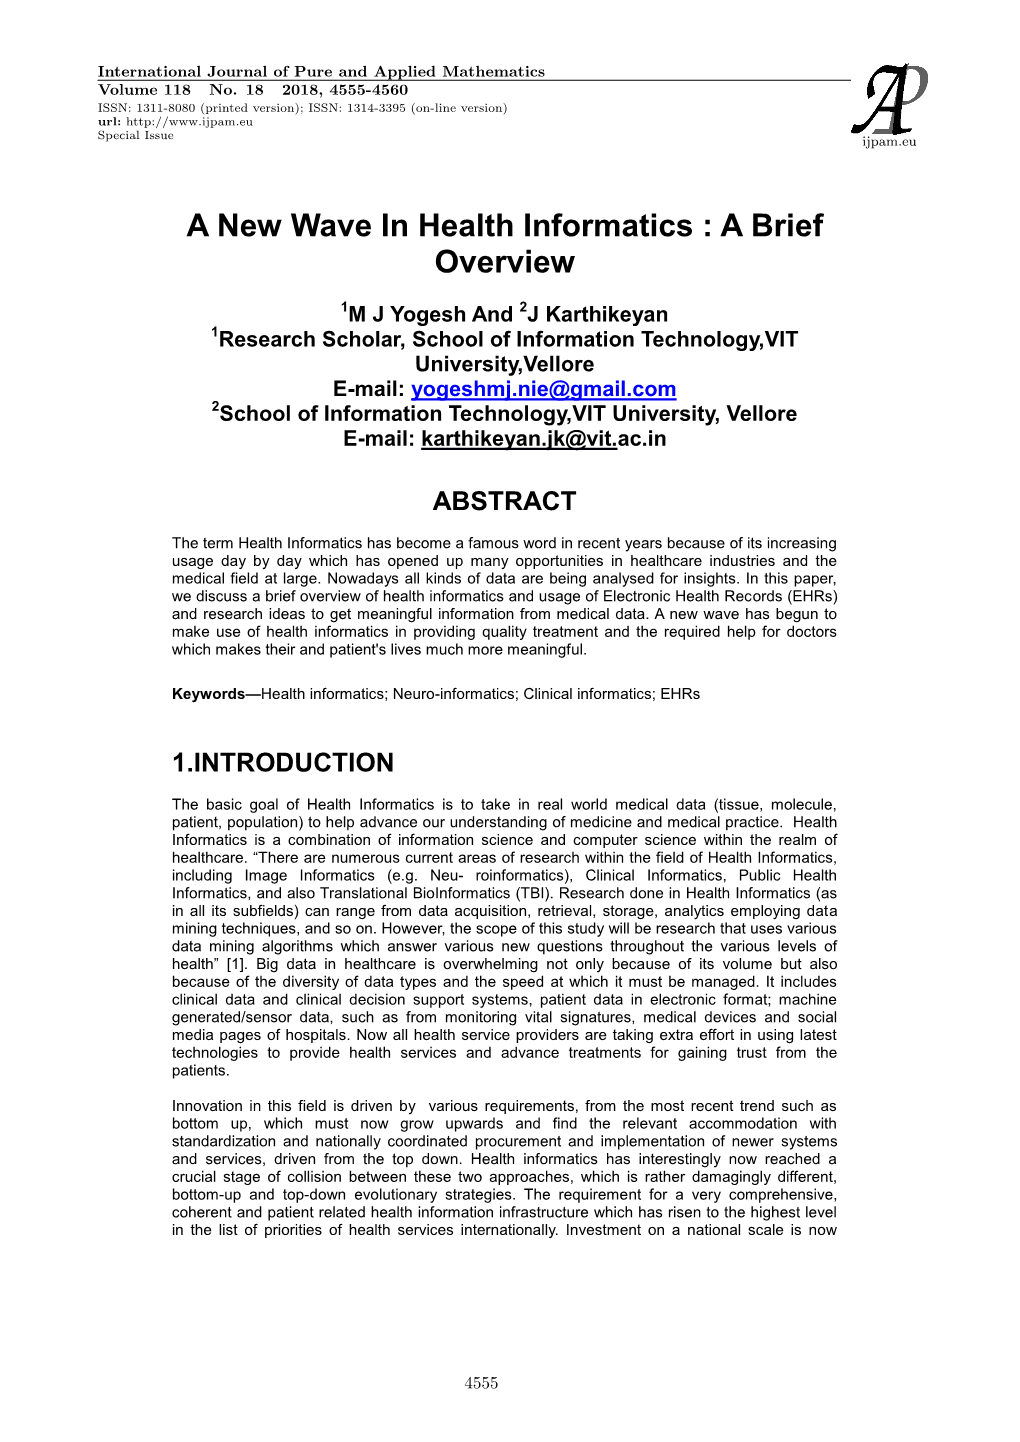 A New Wave in Health Informatics : a Brief Overview